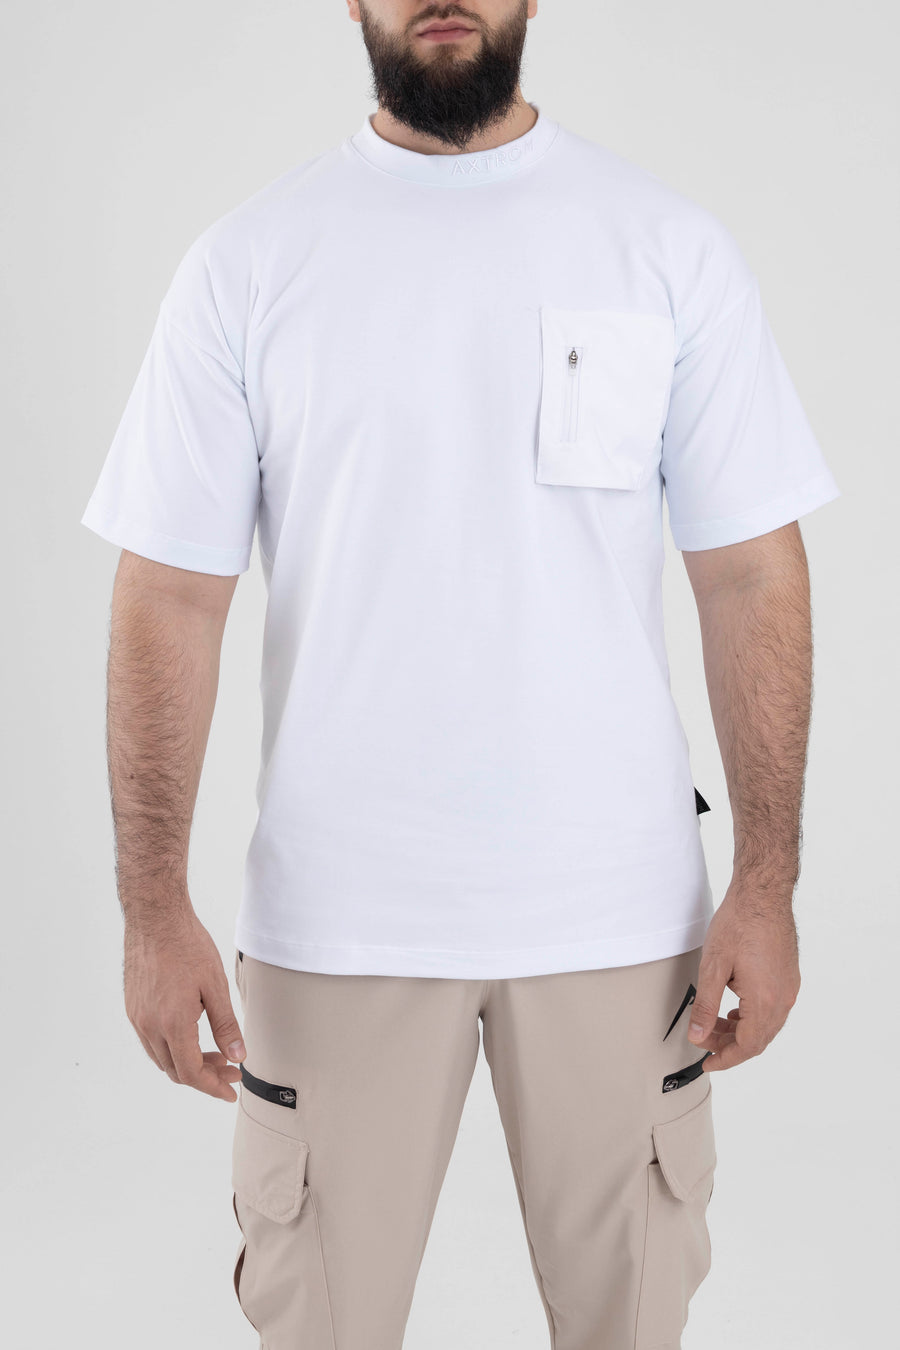 T-Shirt With Pocket (White)